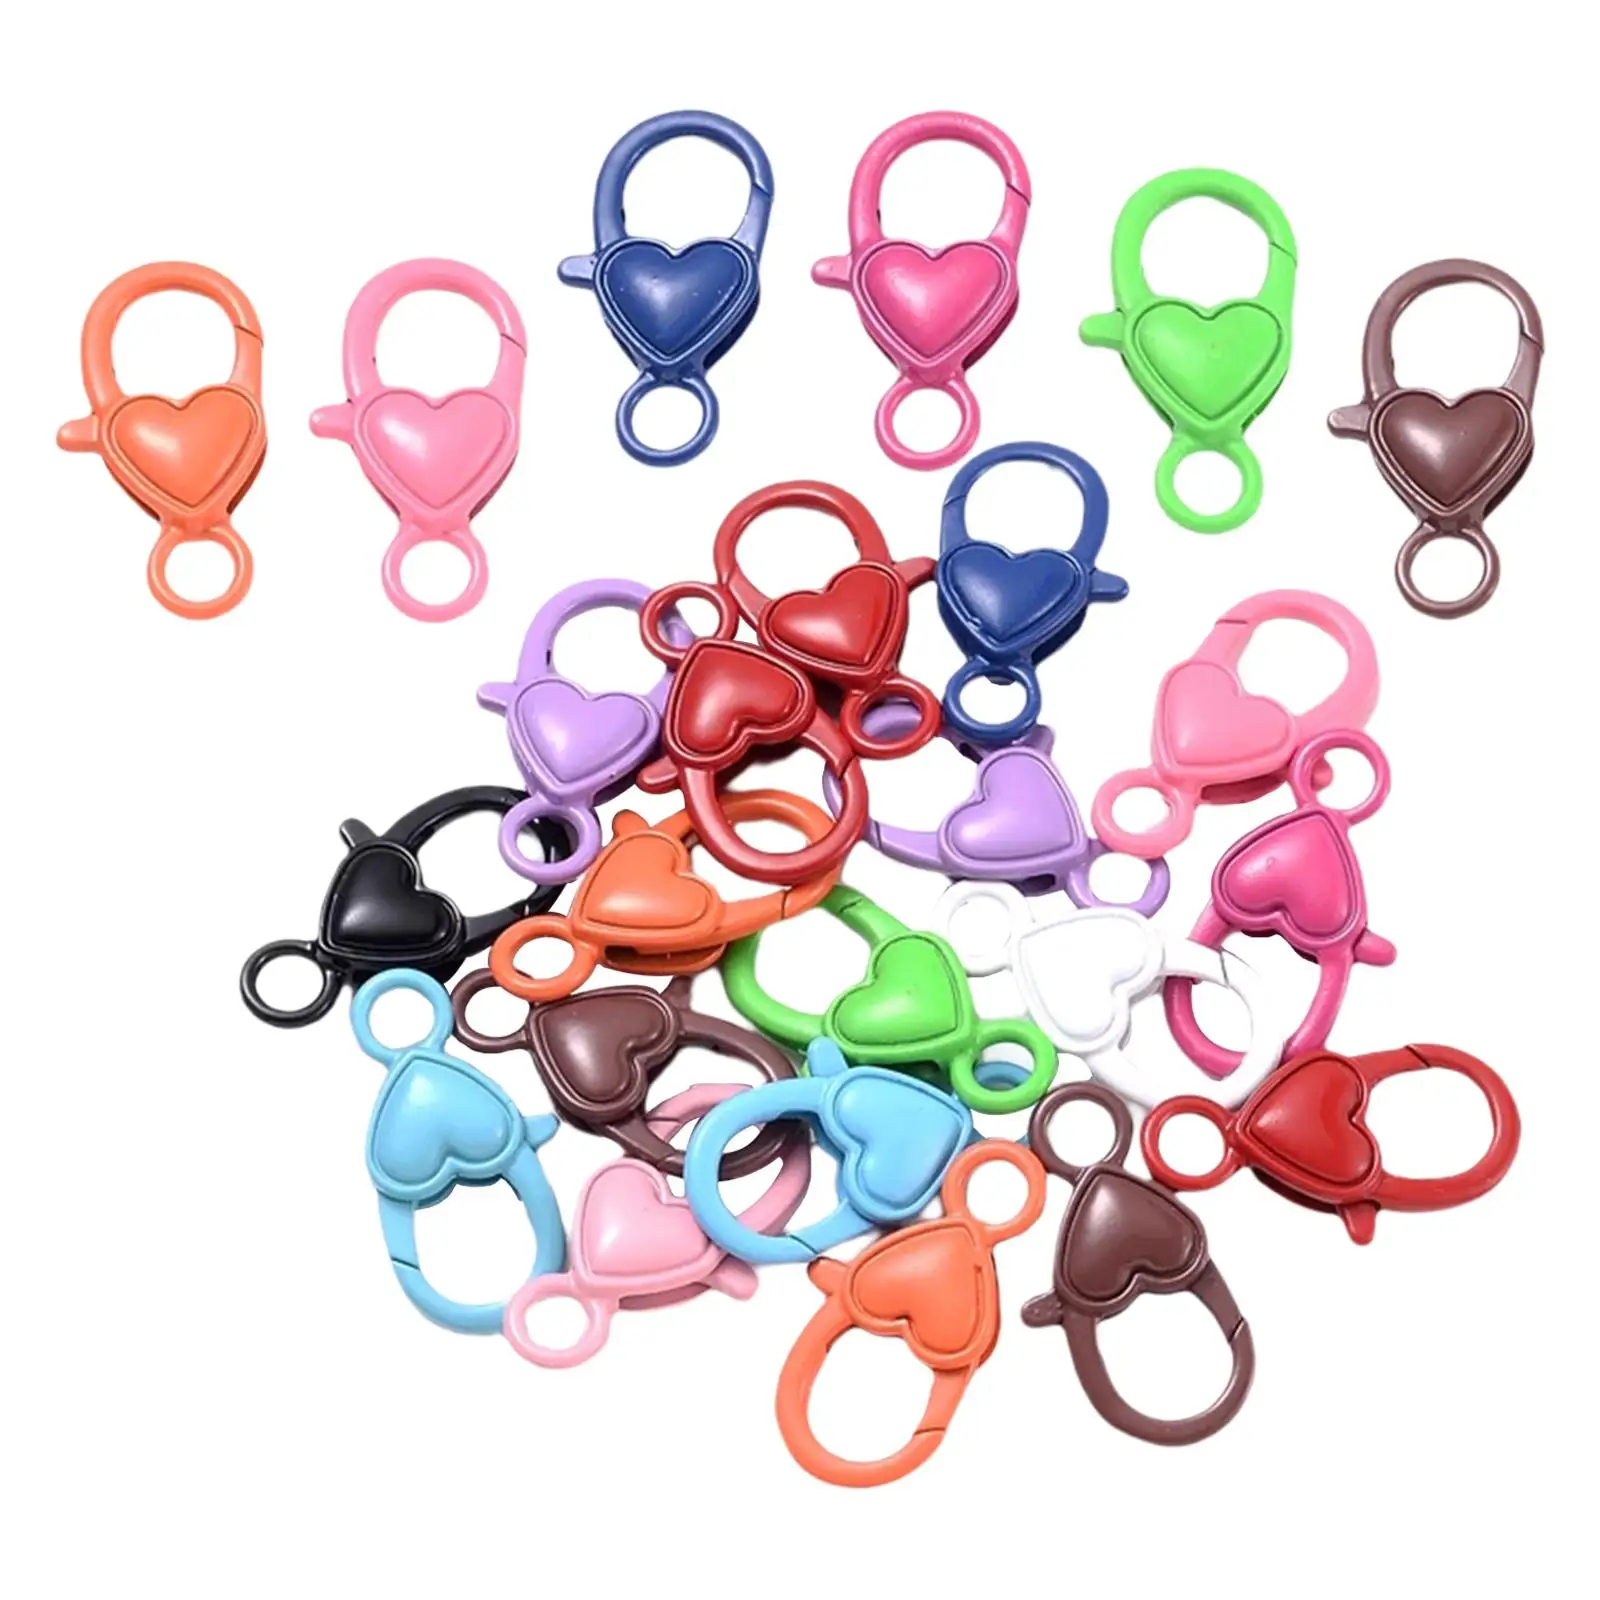 100 Pieces Retro Style  Lobster Clasp Key  Buckle Lobster Clasp Hard Connector  Jewelry Making DIY Key Sewing